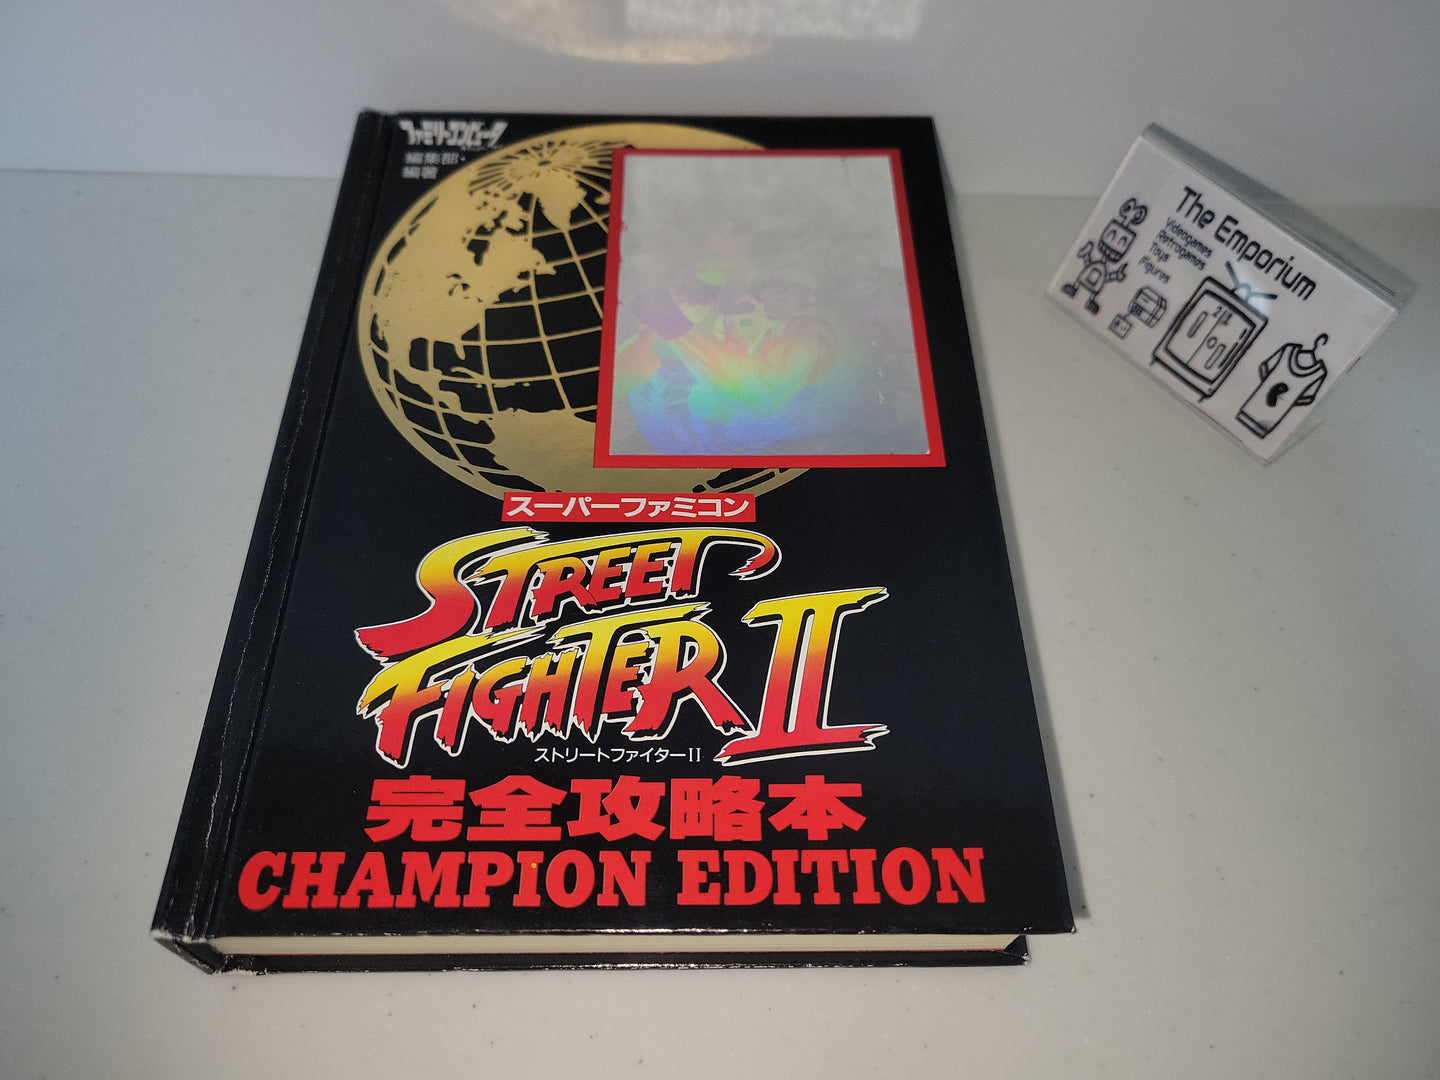 Sfc Street Fighter 2 Complete Strategy Guide Champion Edition  book  - book